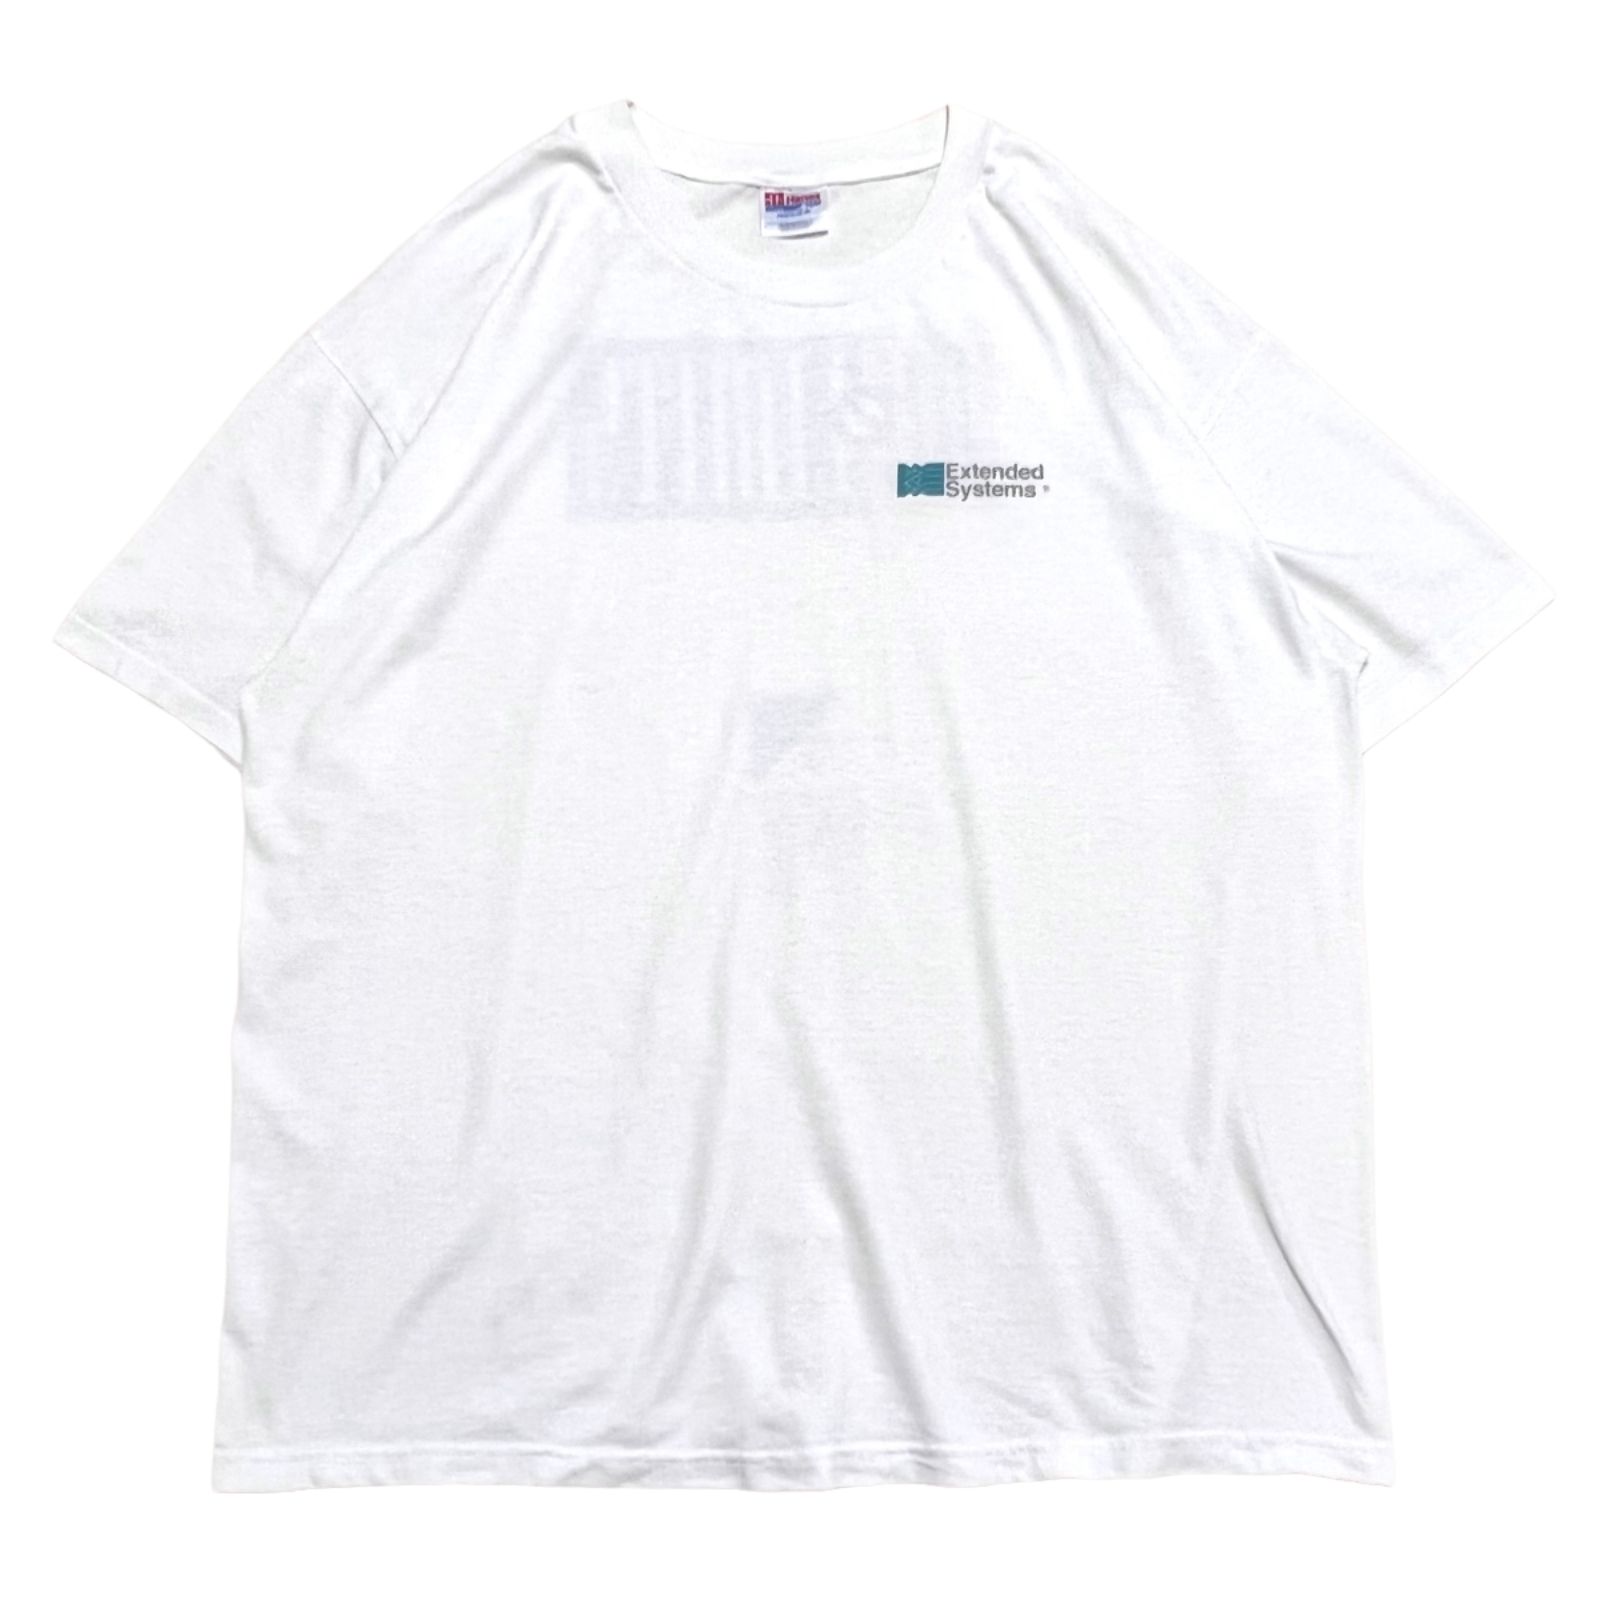 90s 企業 Extended Systems プリント Tシャツ - メルカリ